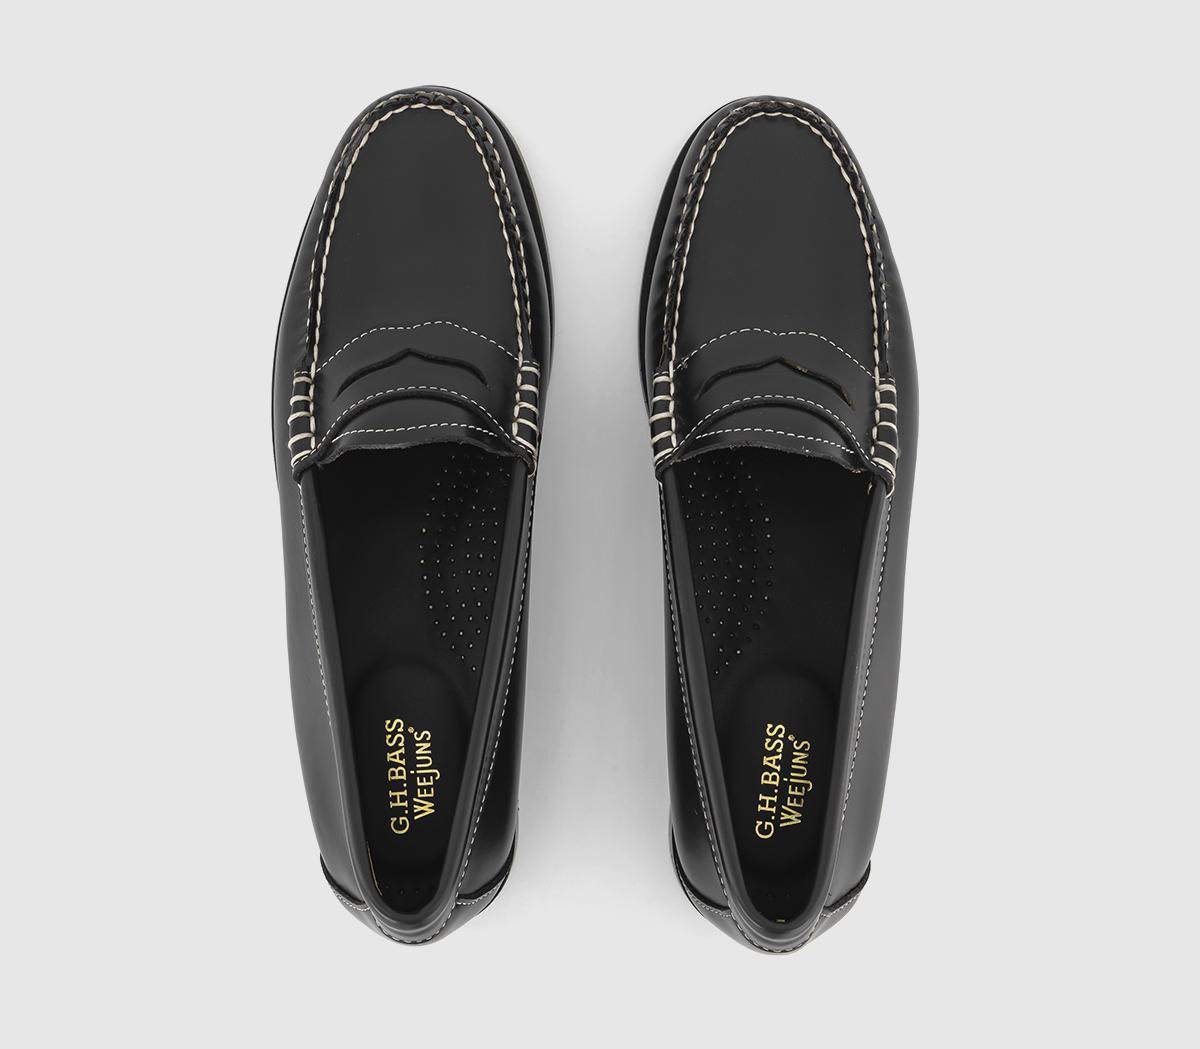 G.H Bass & Co Weejun Womens Penny Contrastitch Loafers Black - Women’s ...